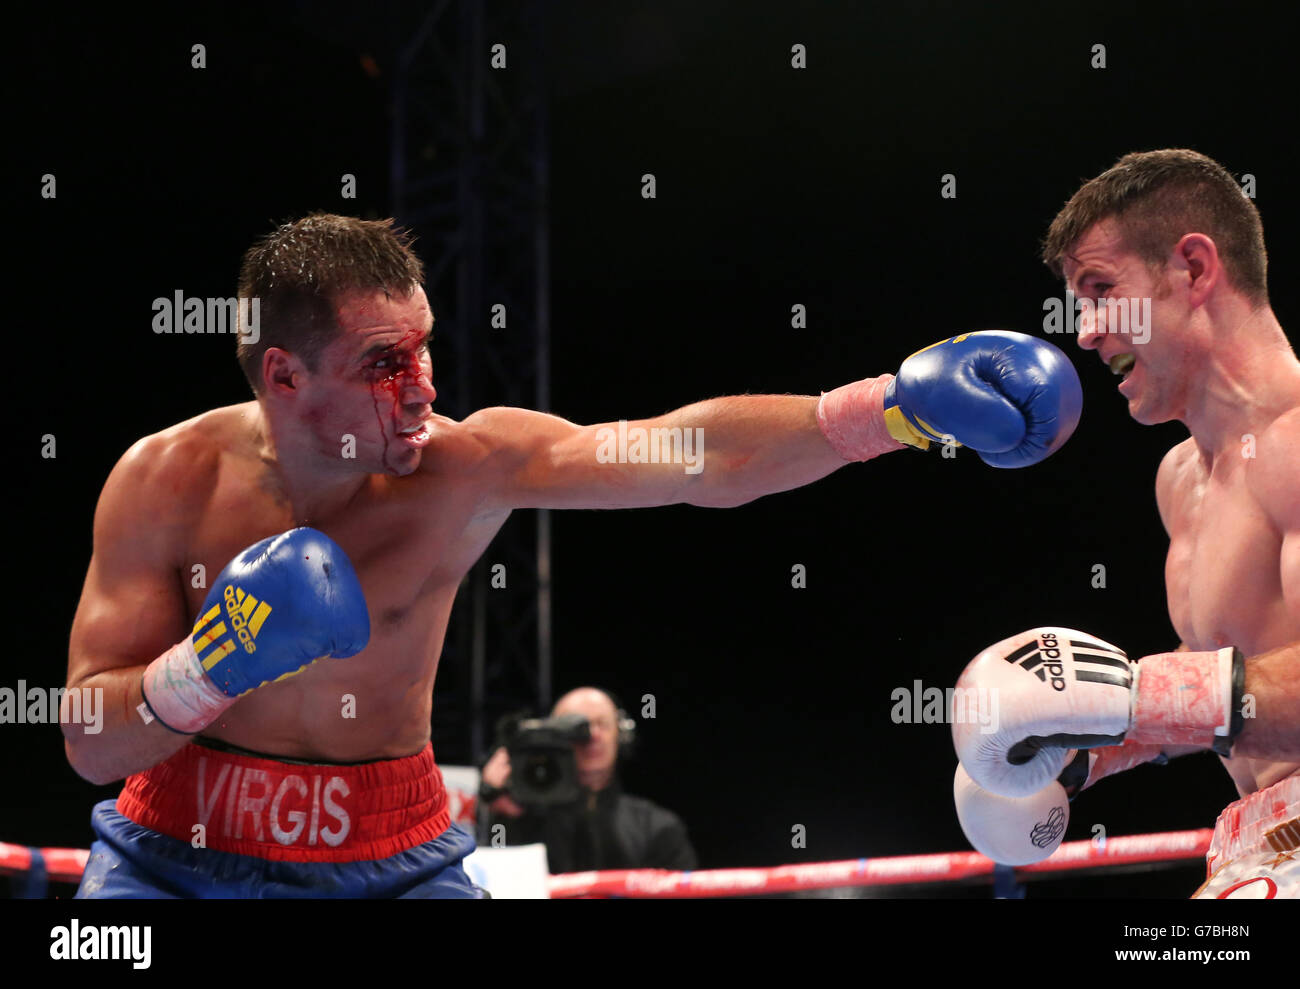 Eamon O'Kane (left) in action against Virgilijus Stapulionis during their IBF Intercontinental Middleweight fight in the Titanic Quarter, Belfast. Stock Photo